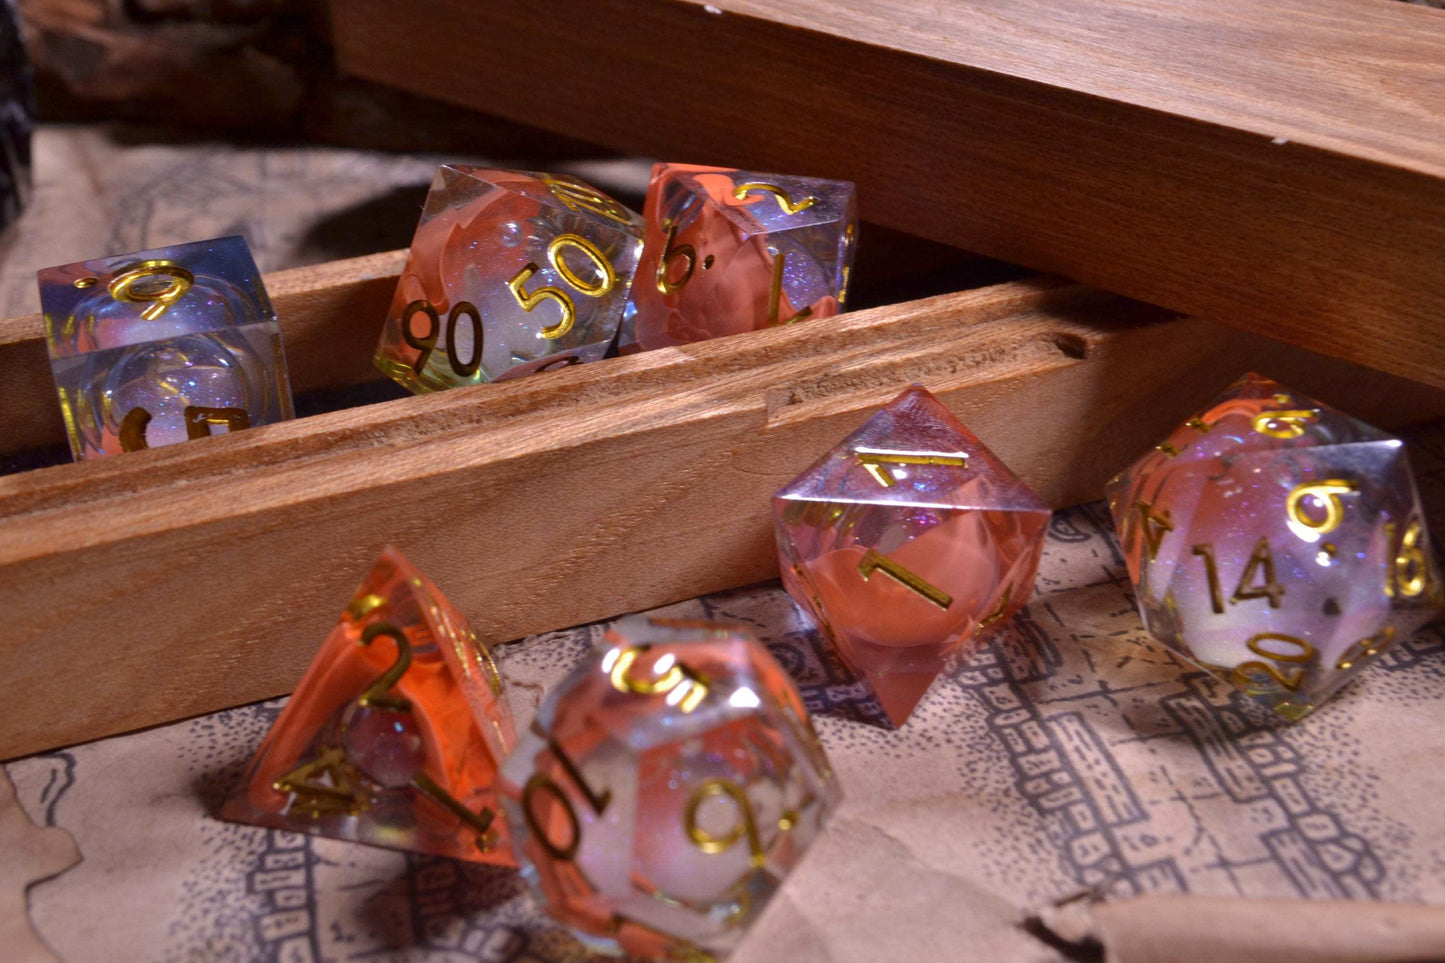 Fae Court Orange Sharp Edge Liquid Core Resin D&D Dice Set With Metallic Gold Numbering - For Dungeons and Dragons - Gift Set